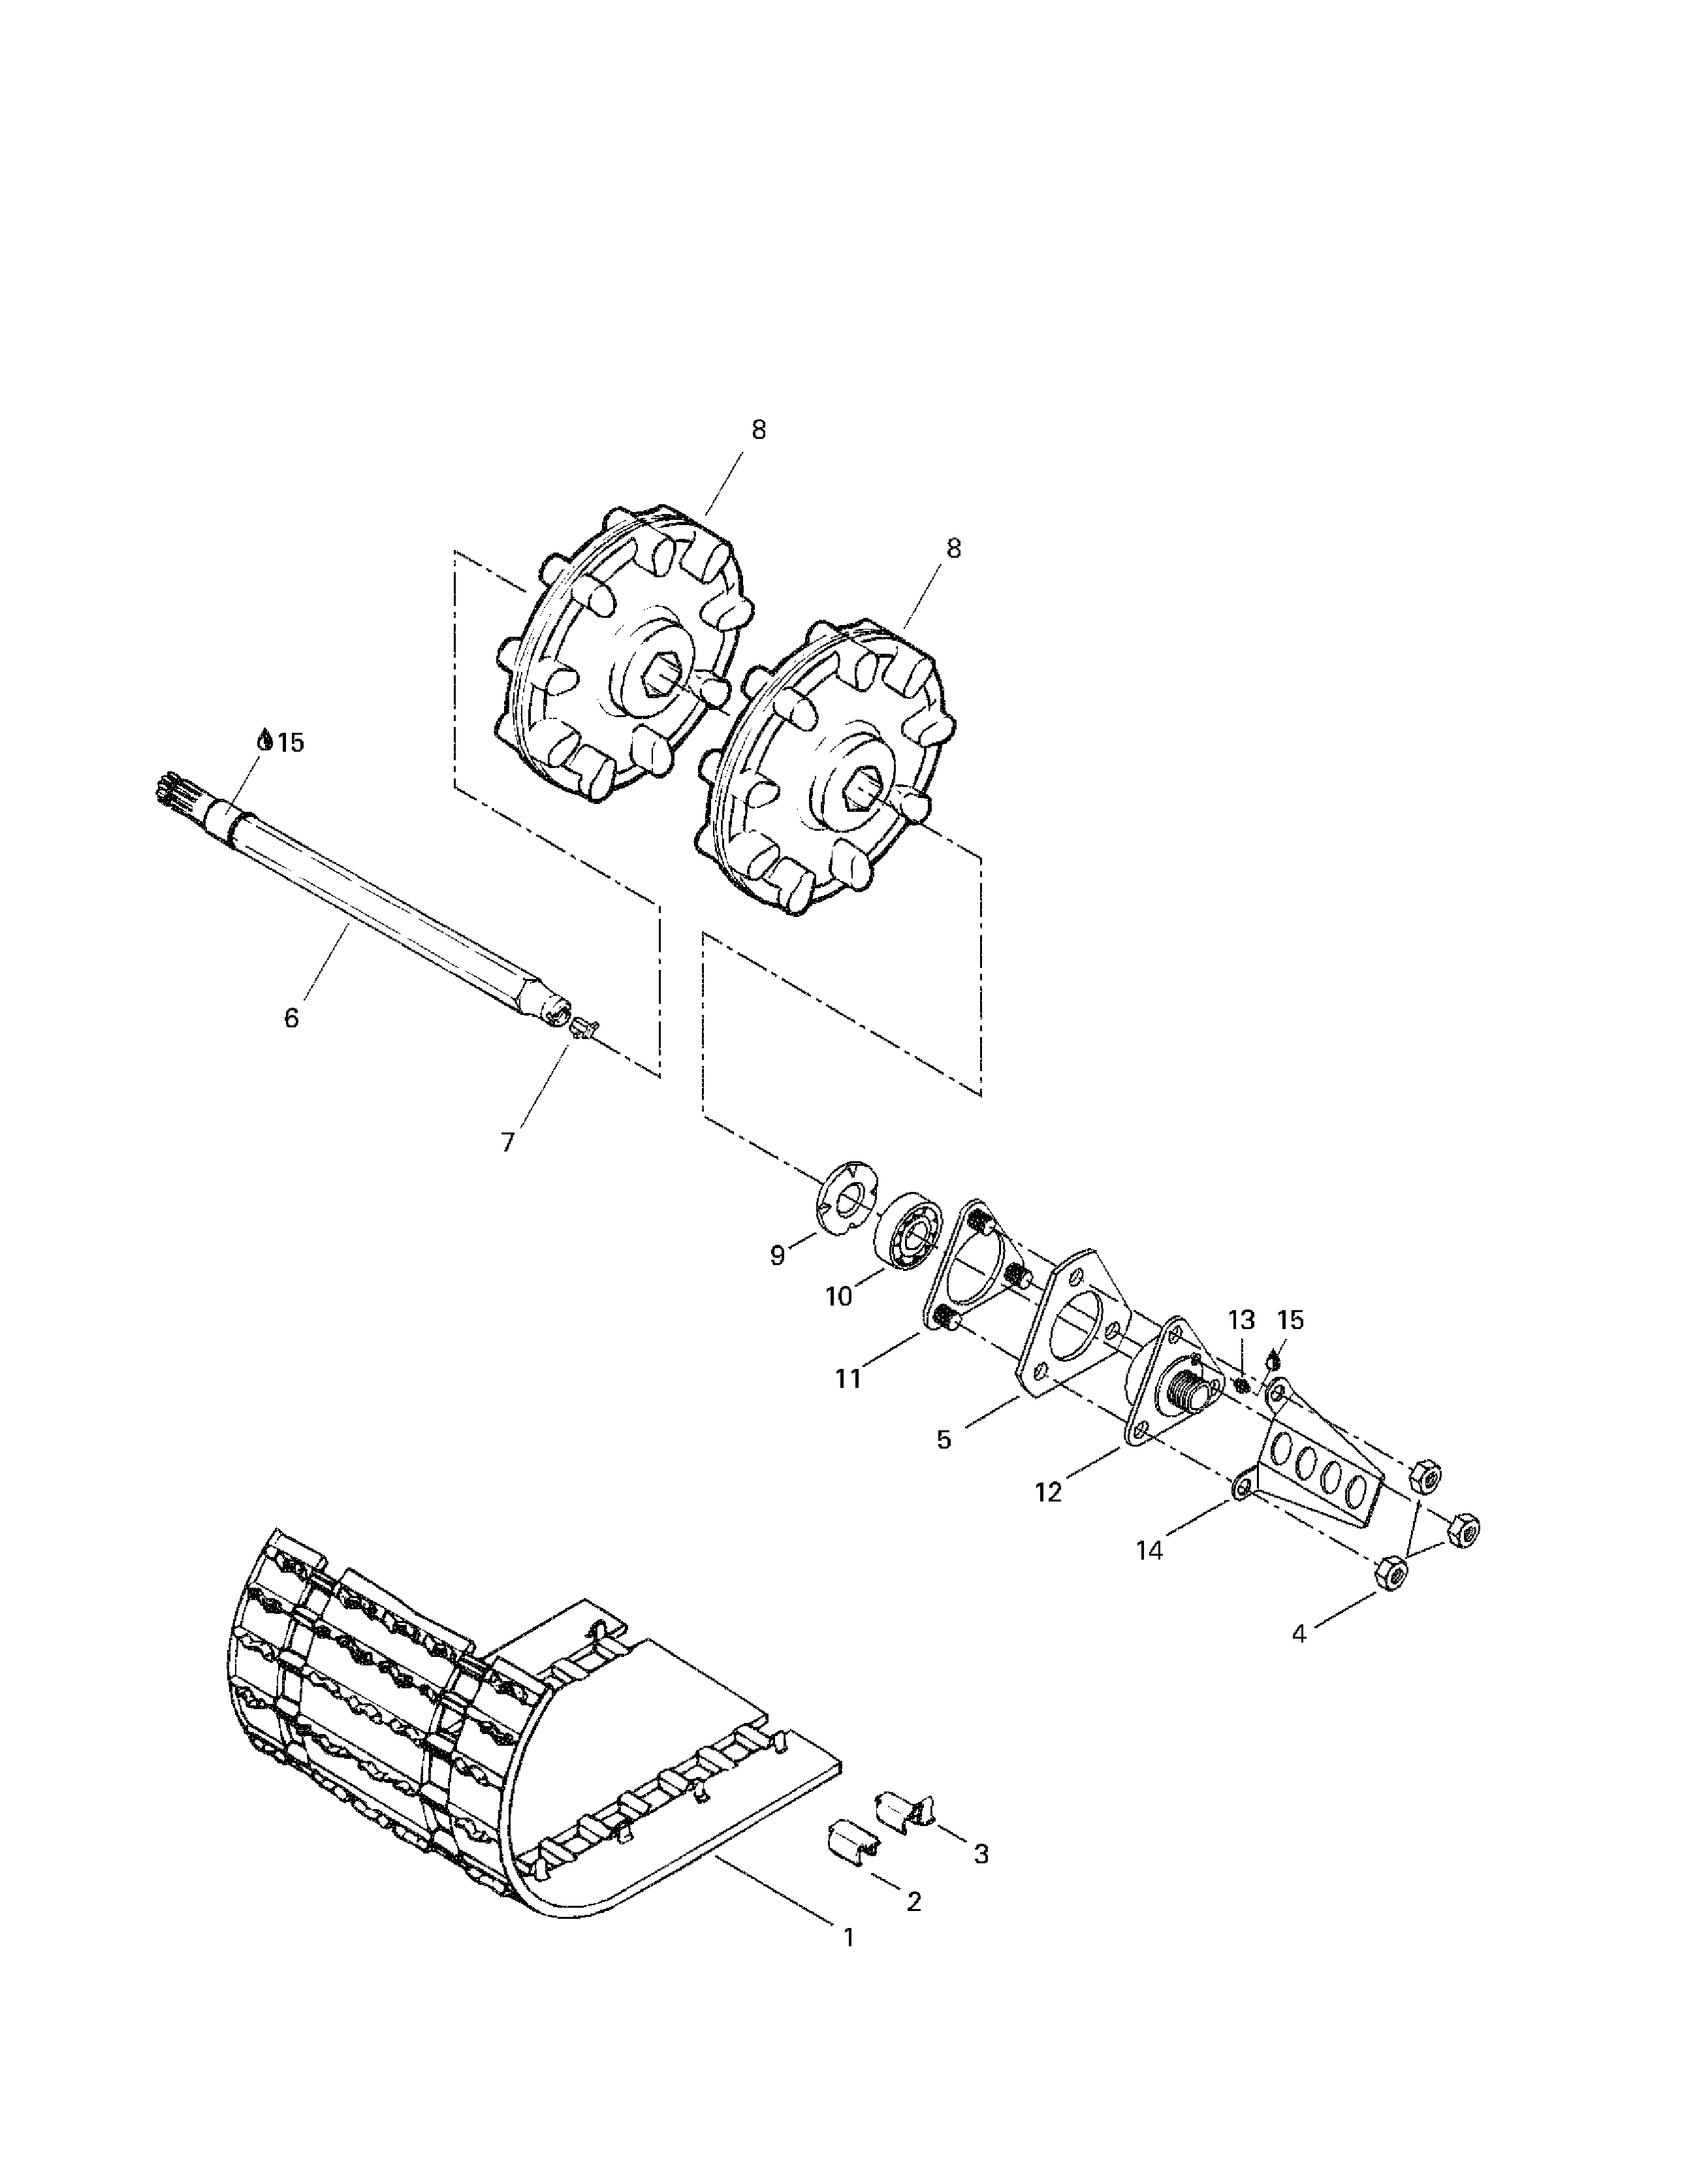 Drive axle and track